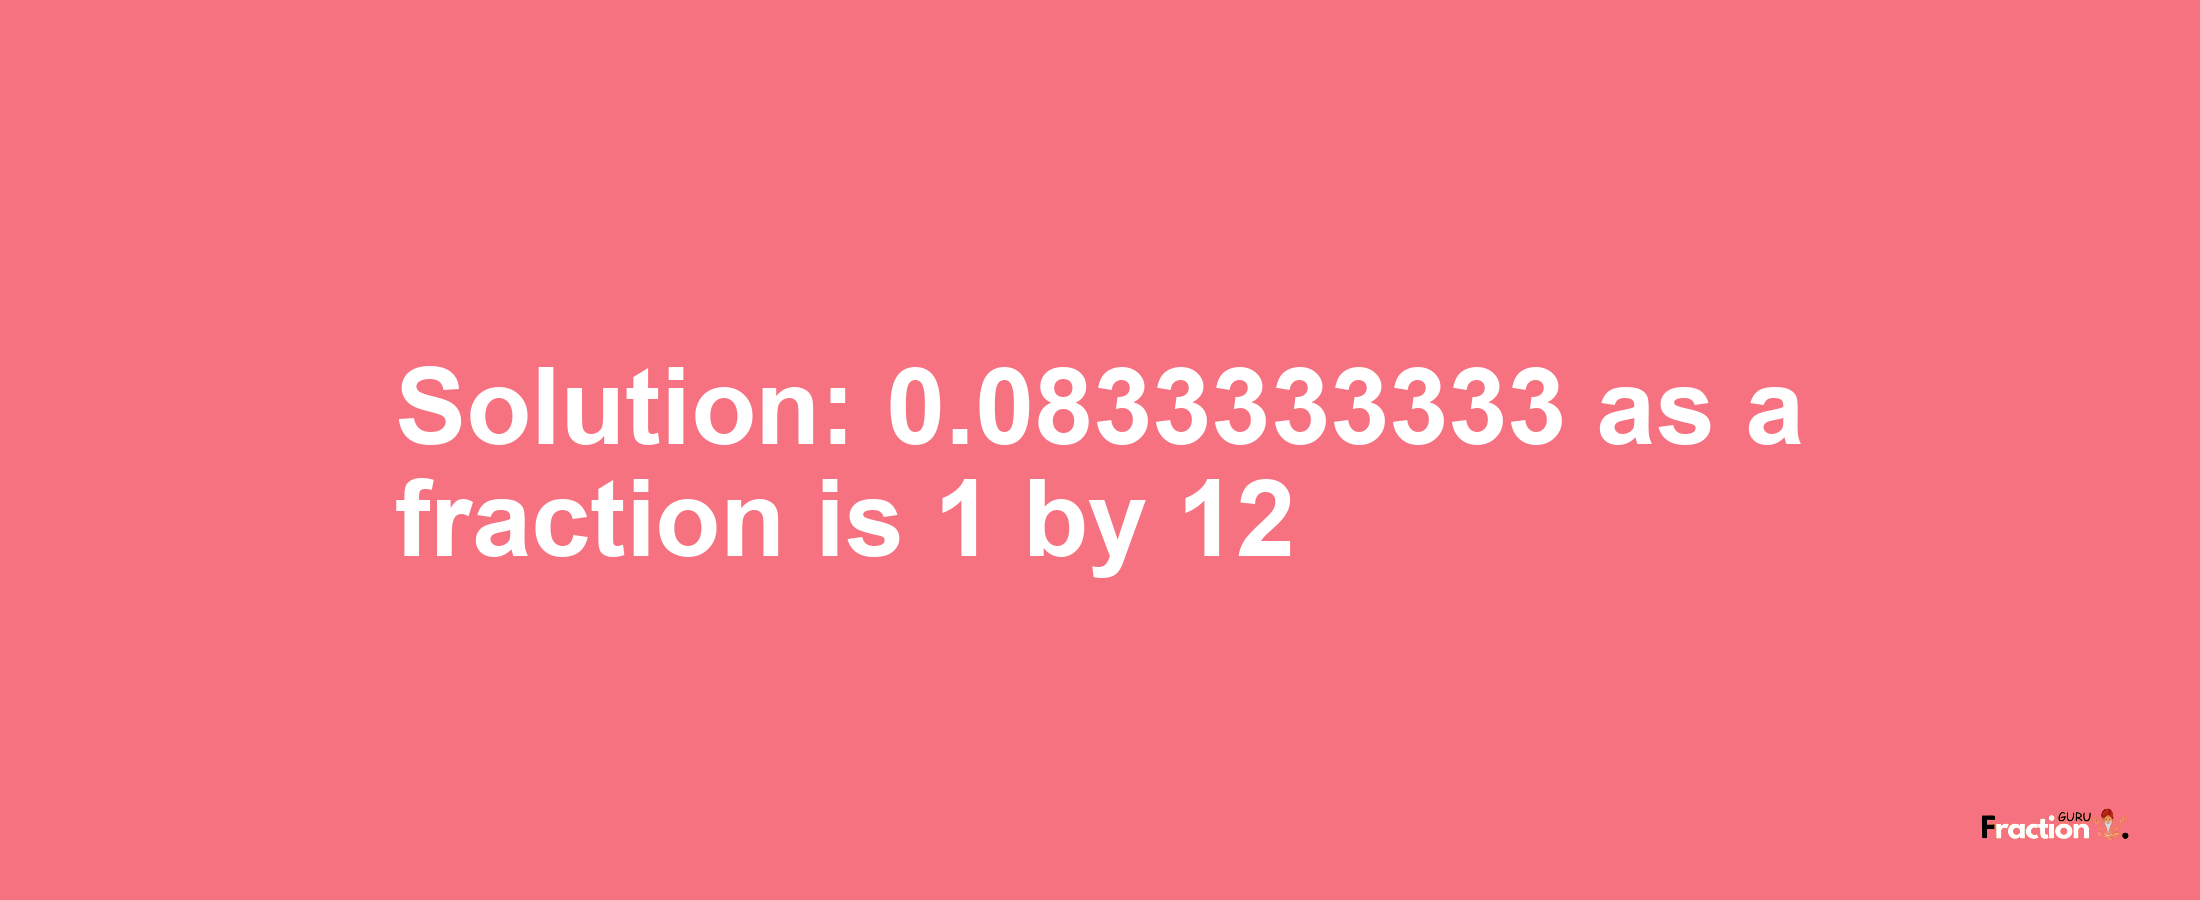 Solution:0.0833333333 as a fraction is 1/12